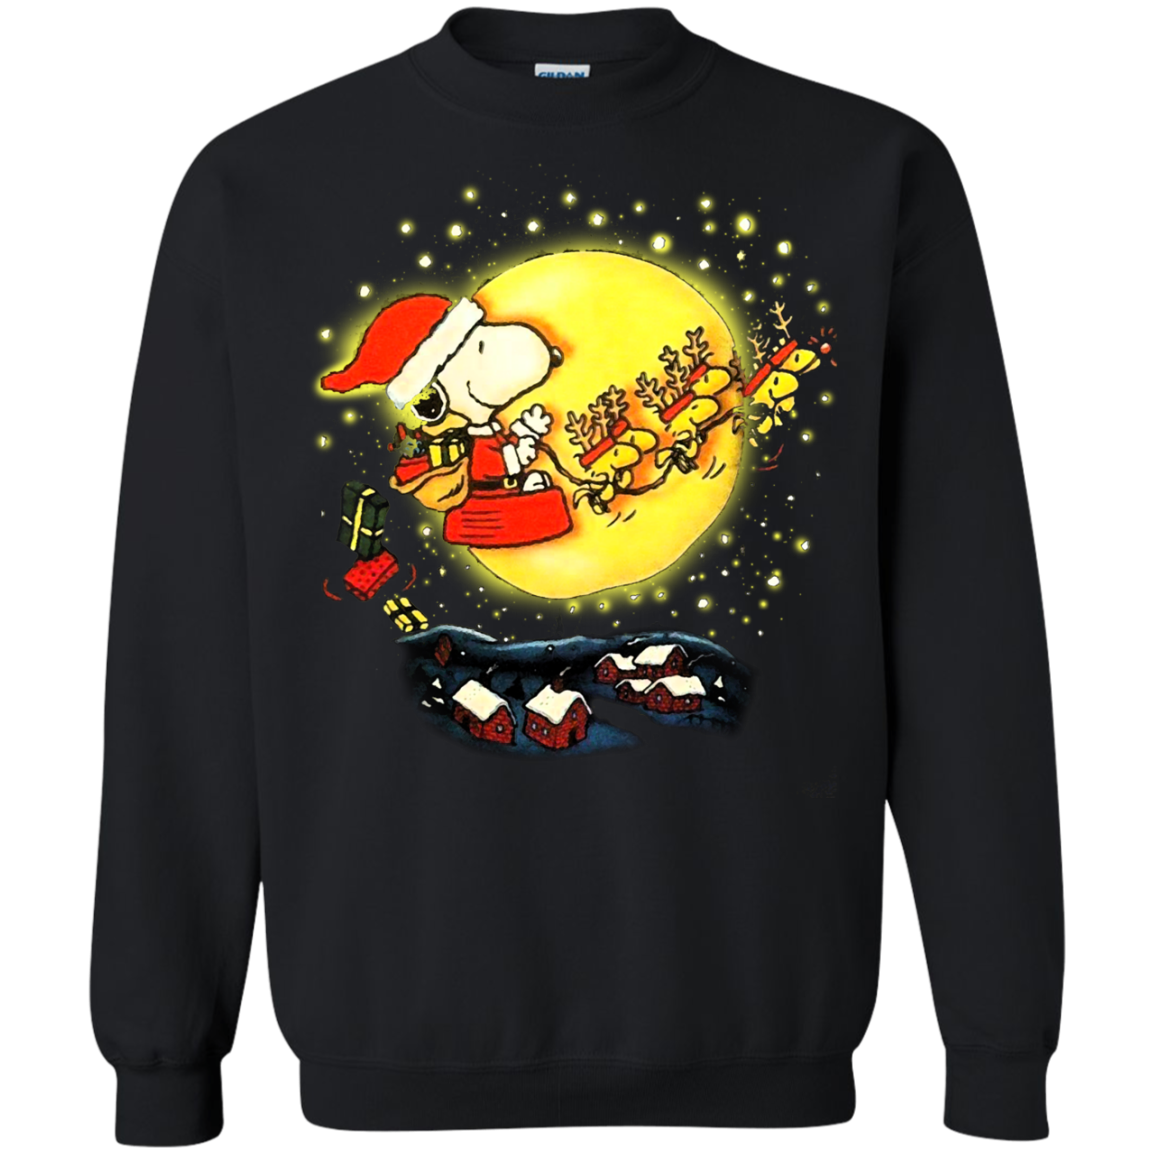 Snoopy Christmas decorations shirt, sweater, hoodie